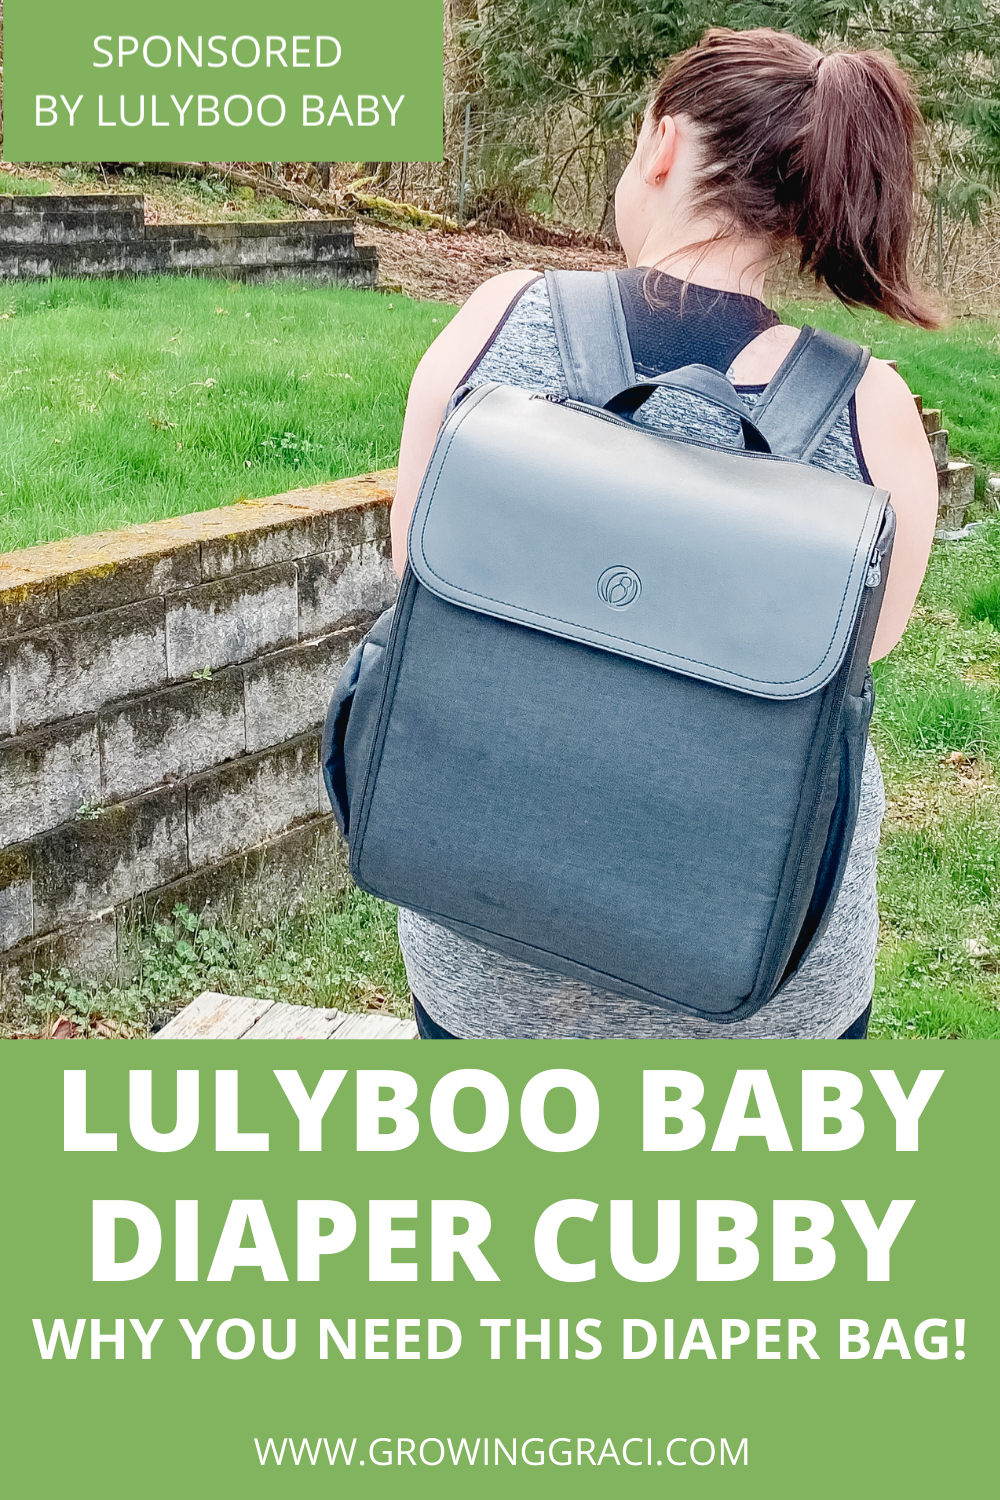 Lulyboo Baby’s Diaper Cubby - A Baby Registry Must-Have - Growing Graci